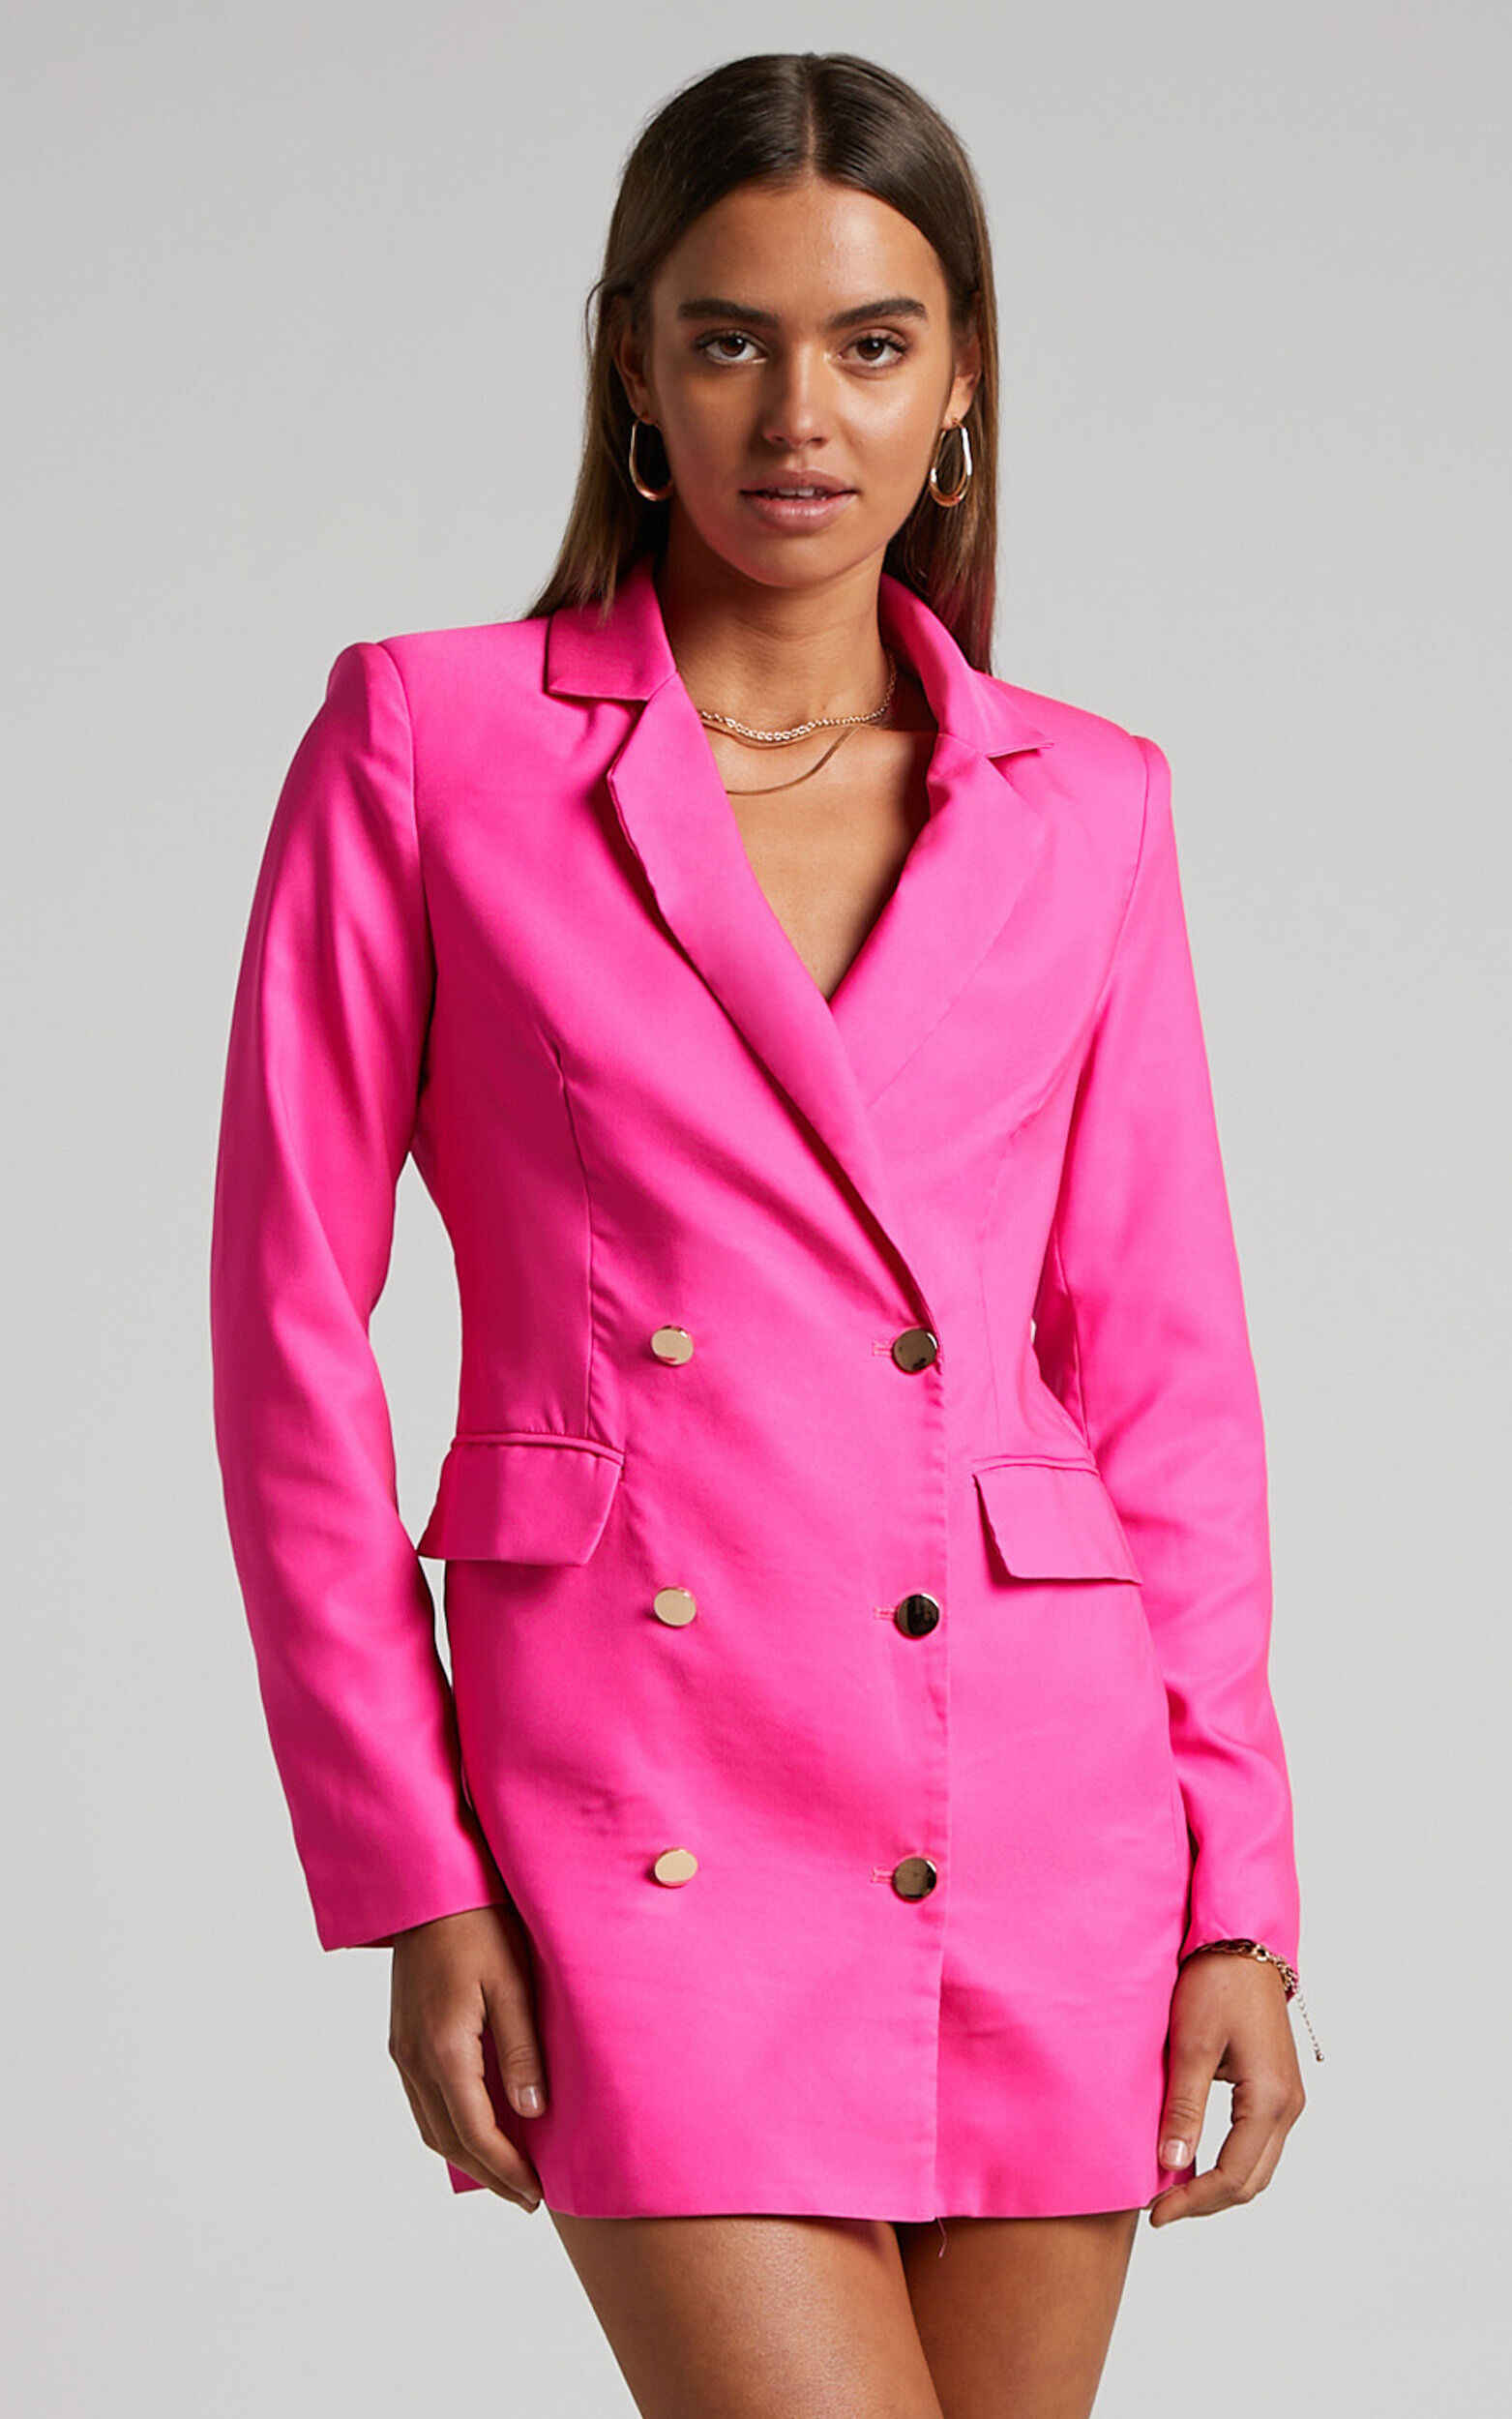 Nathany Double Breasted Blazer Mini Dress in Hot Pink - 04, PNK1, super-hi-res image number null